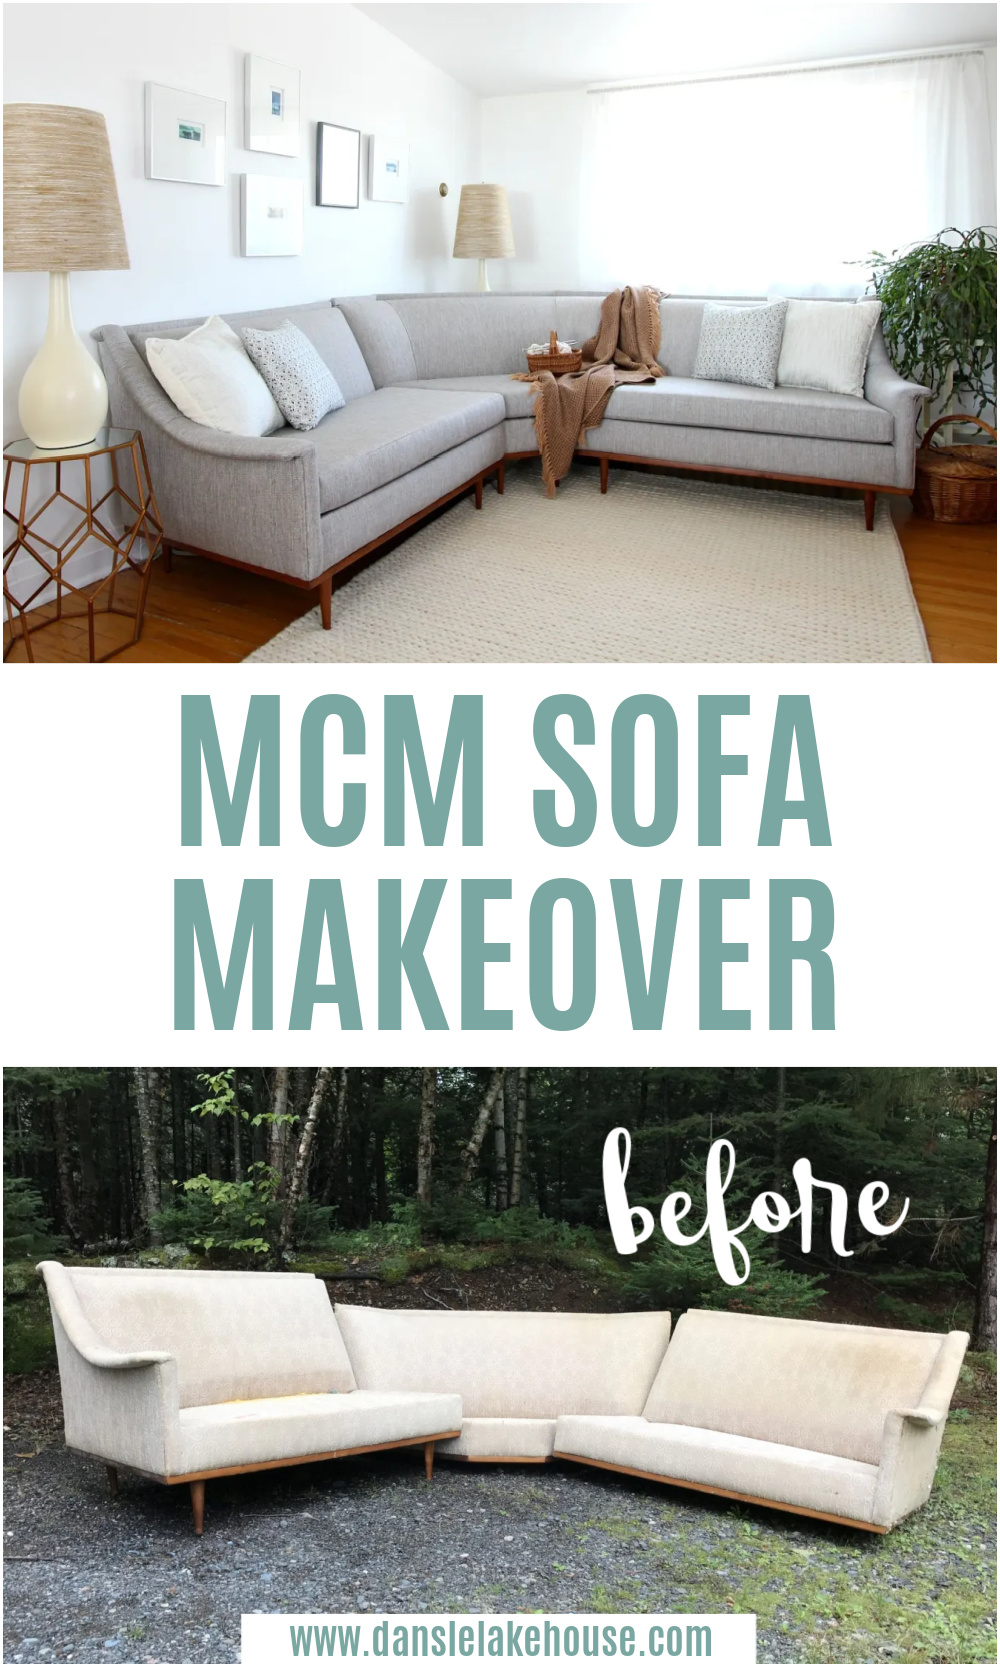 MCM sofa makeover before and after